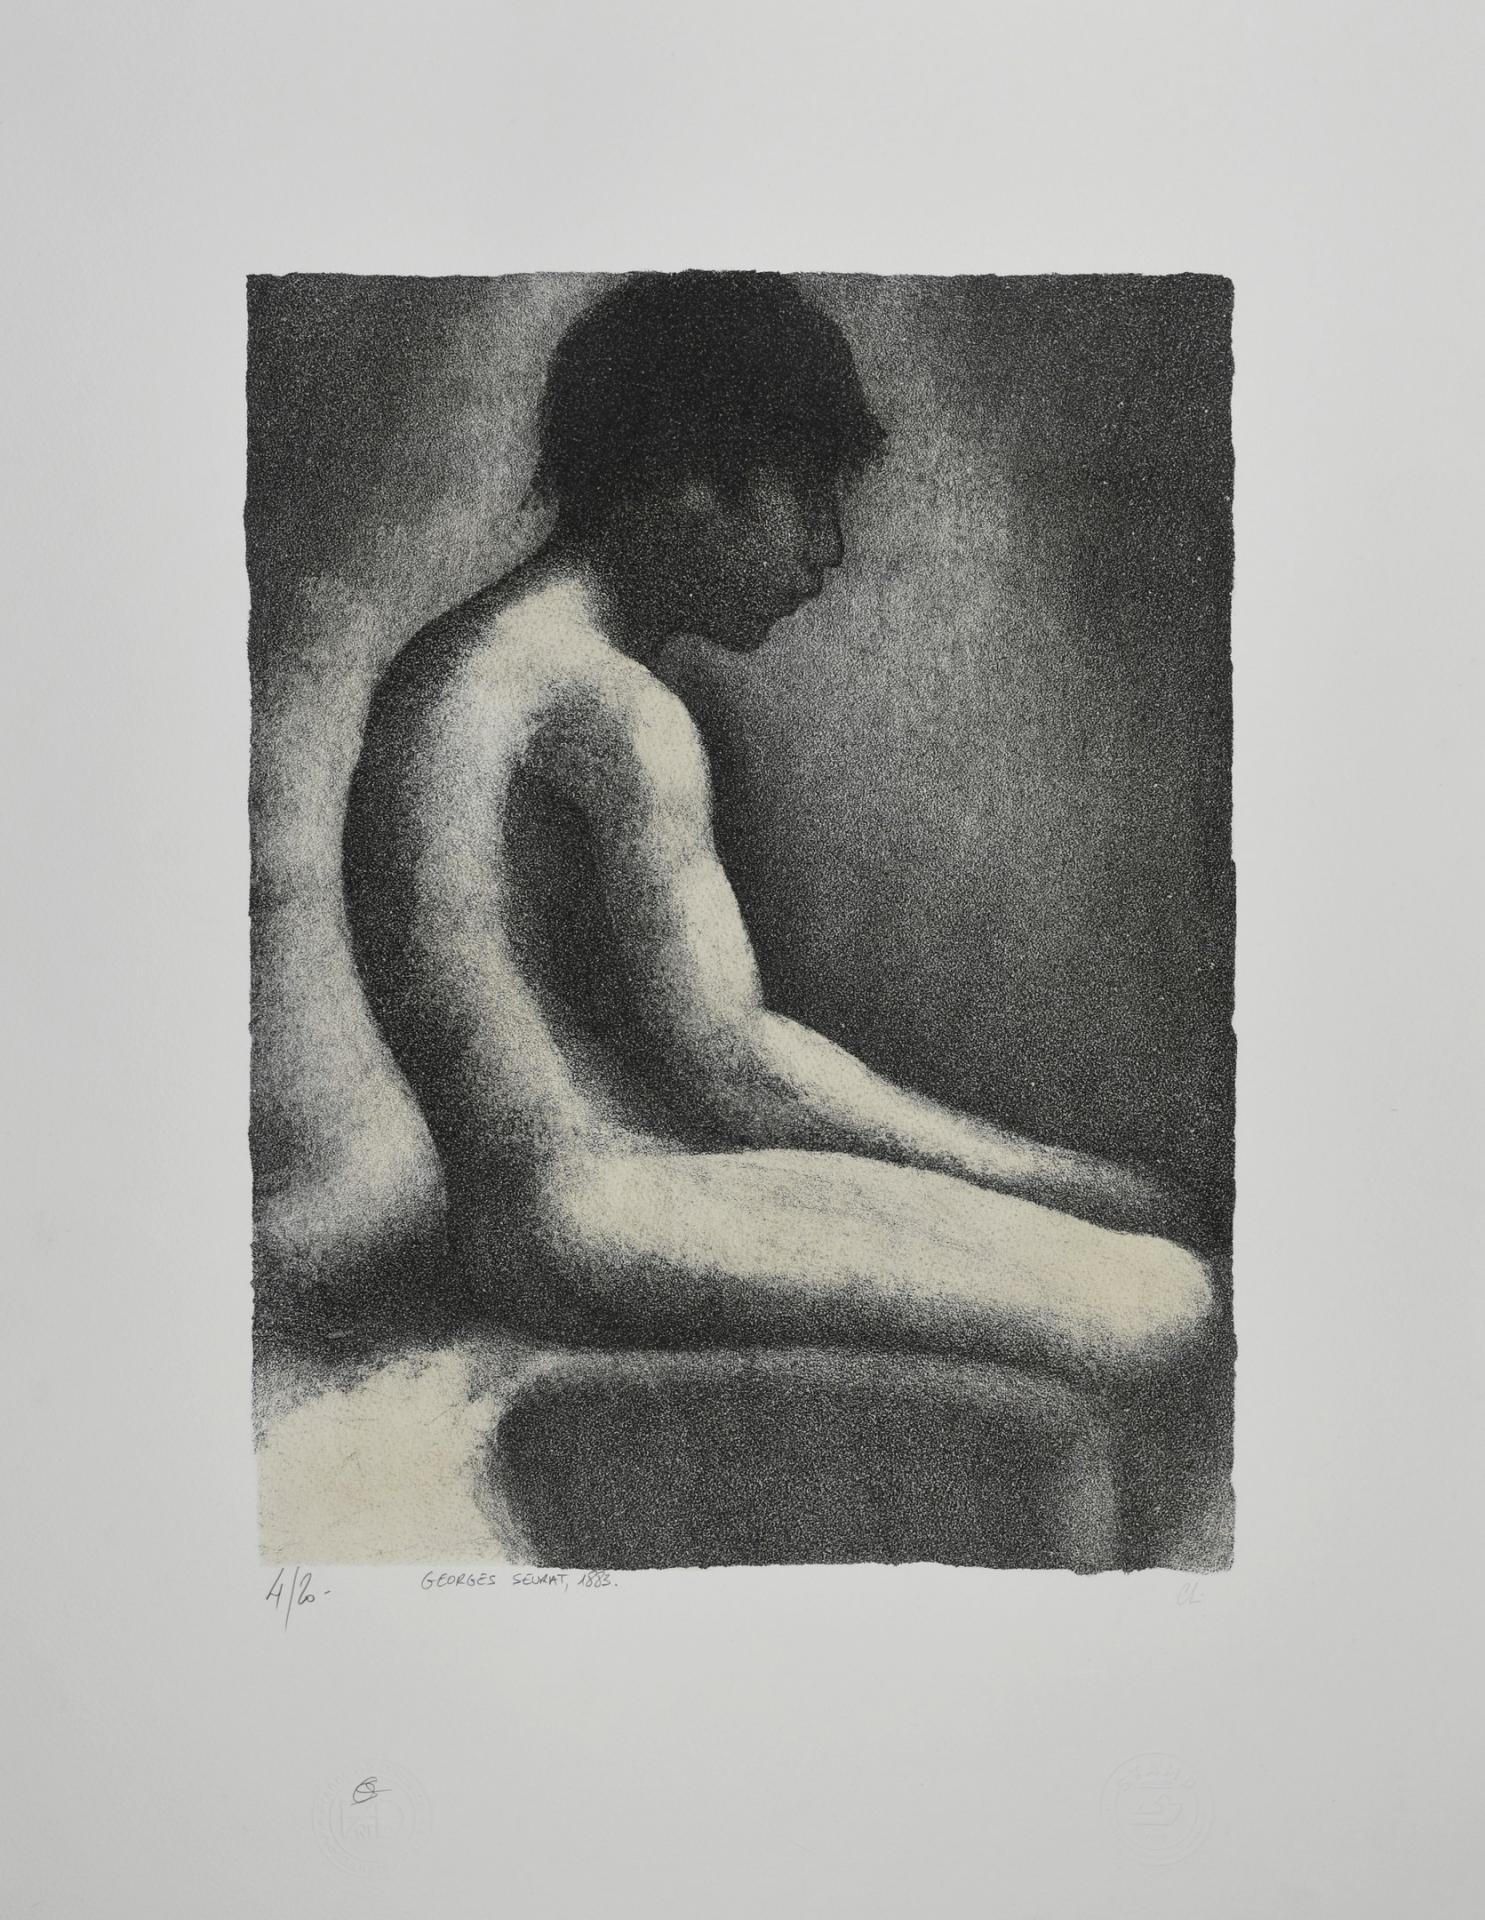 GEORGES SEURAT | Lithograph | Seated Nude, 1883 from a study realized in 1883 for "Une baignade à Asnières" / "Bathing in Asnières" (1884))